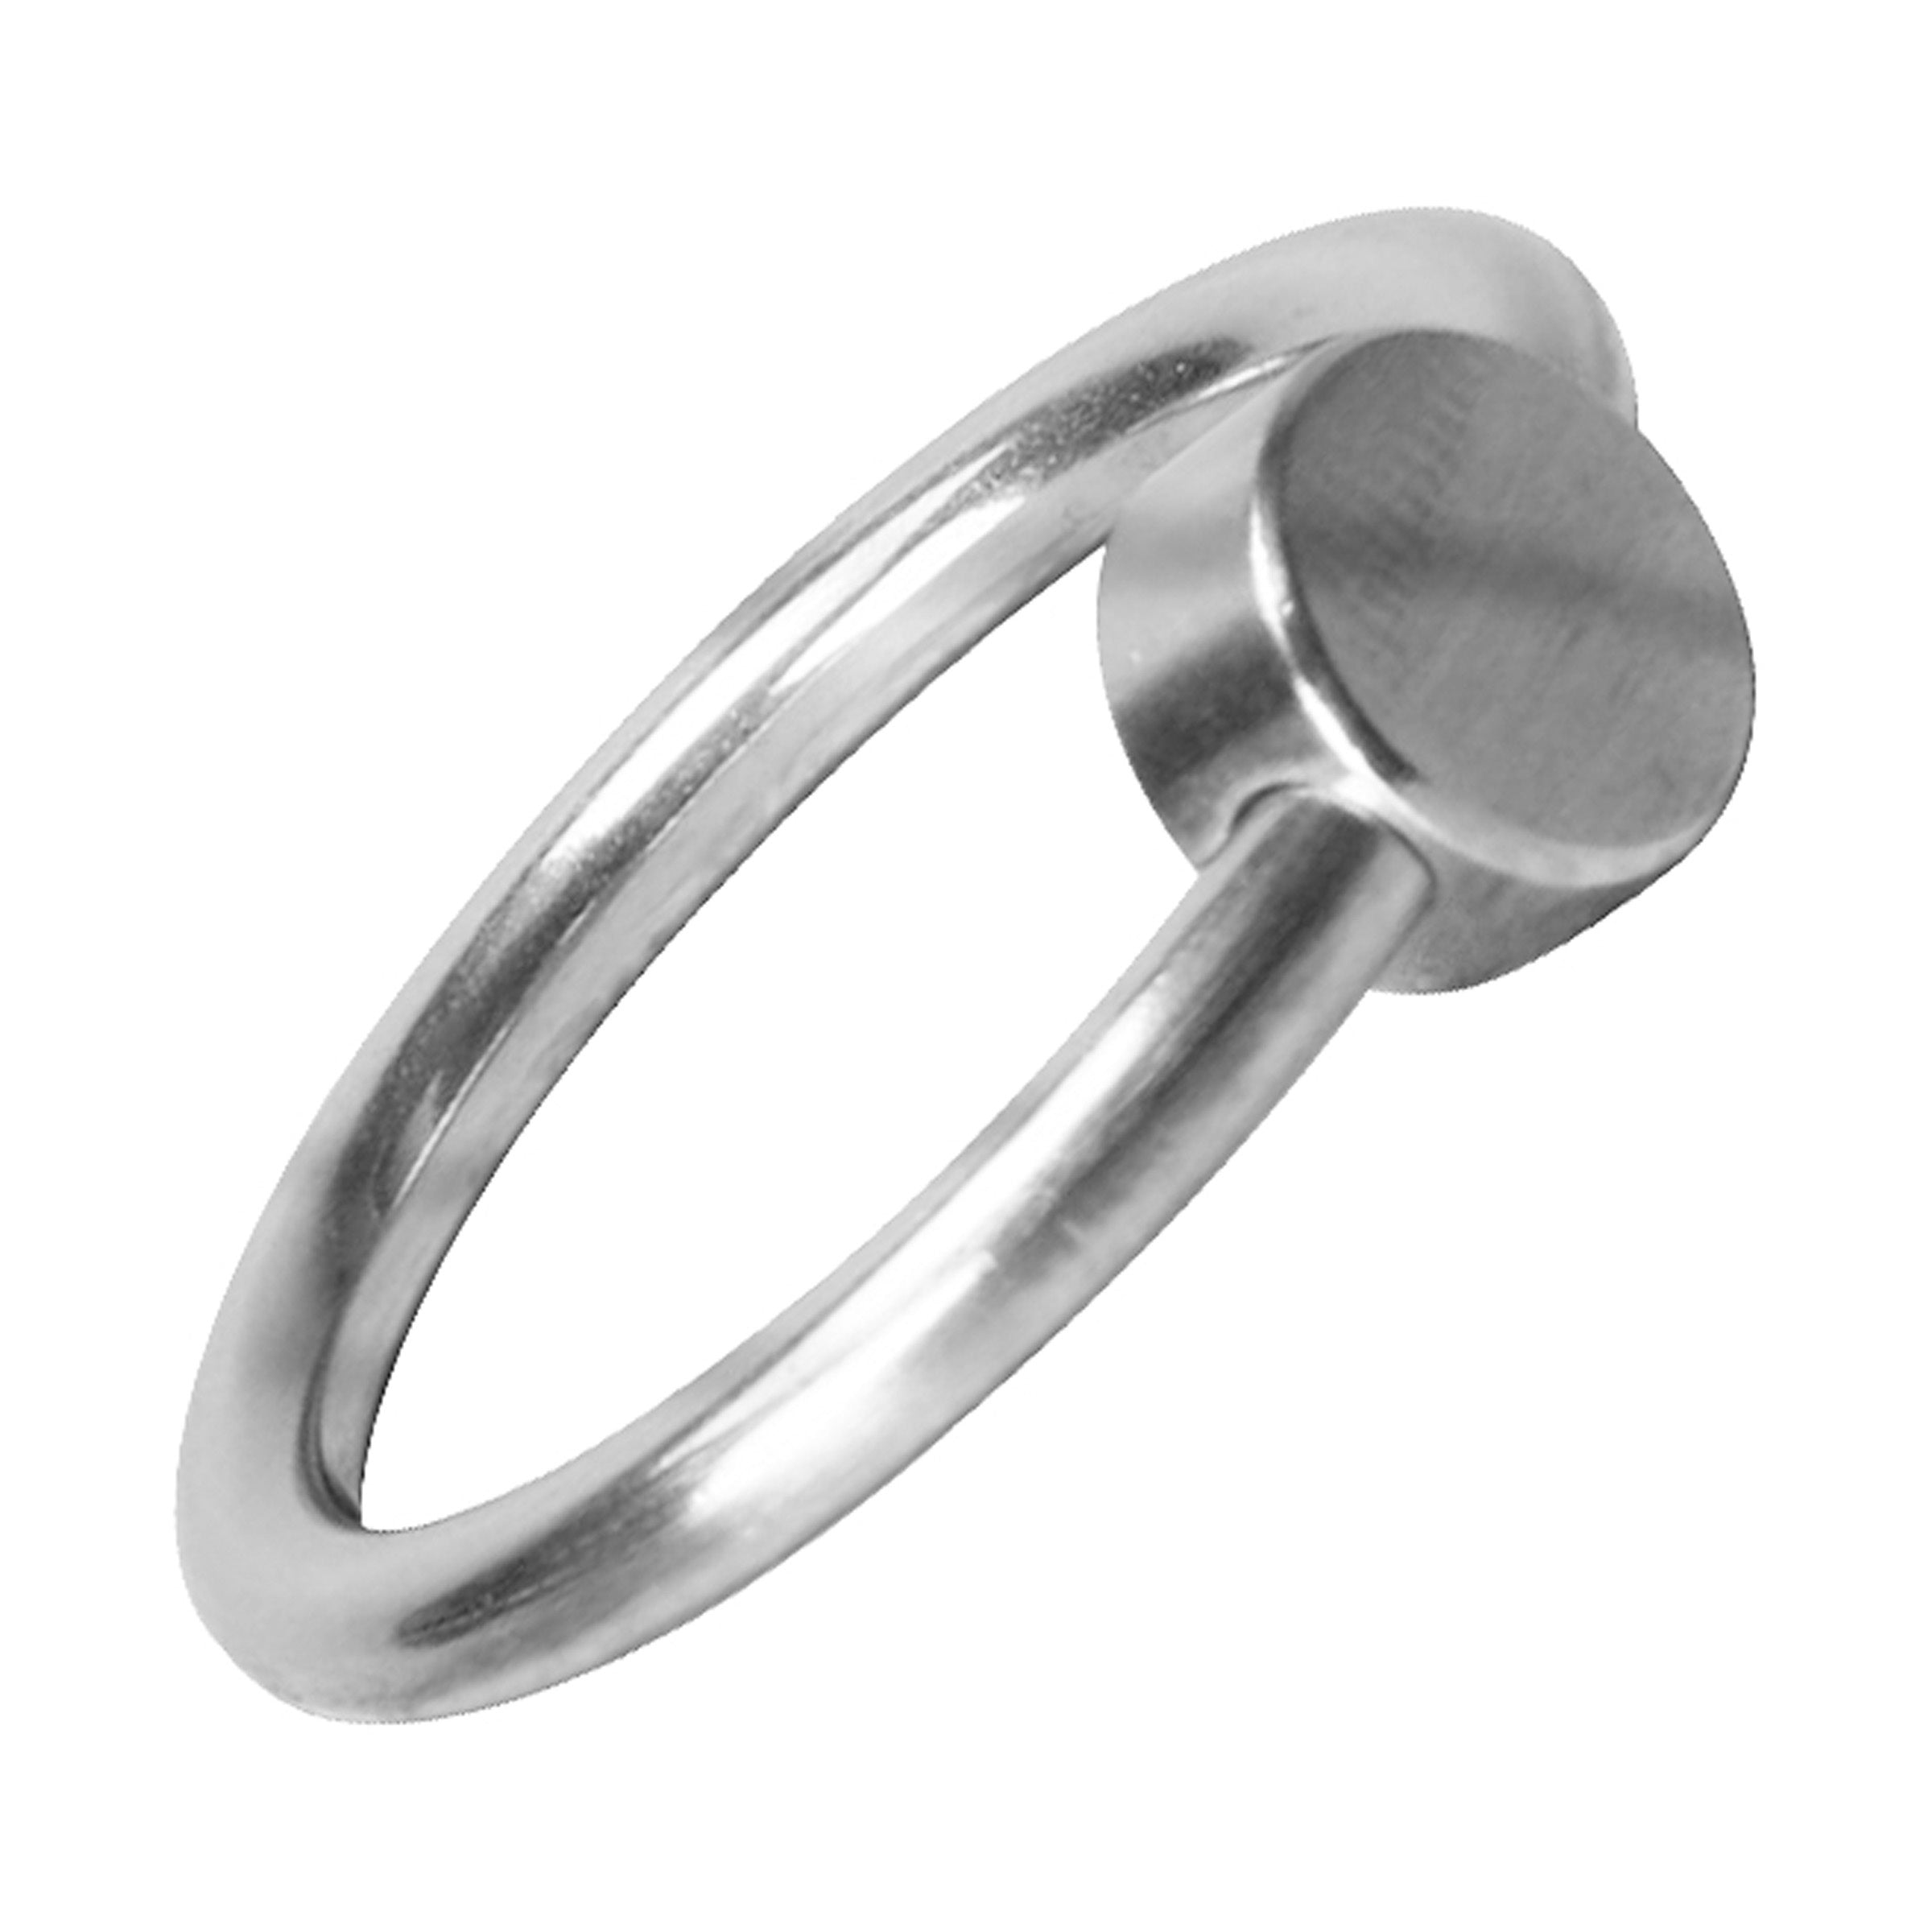 Penis Head Glans Ring with Pressure Point – XR Brands